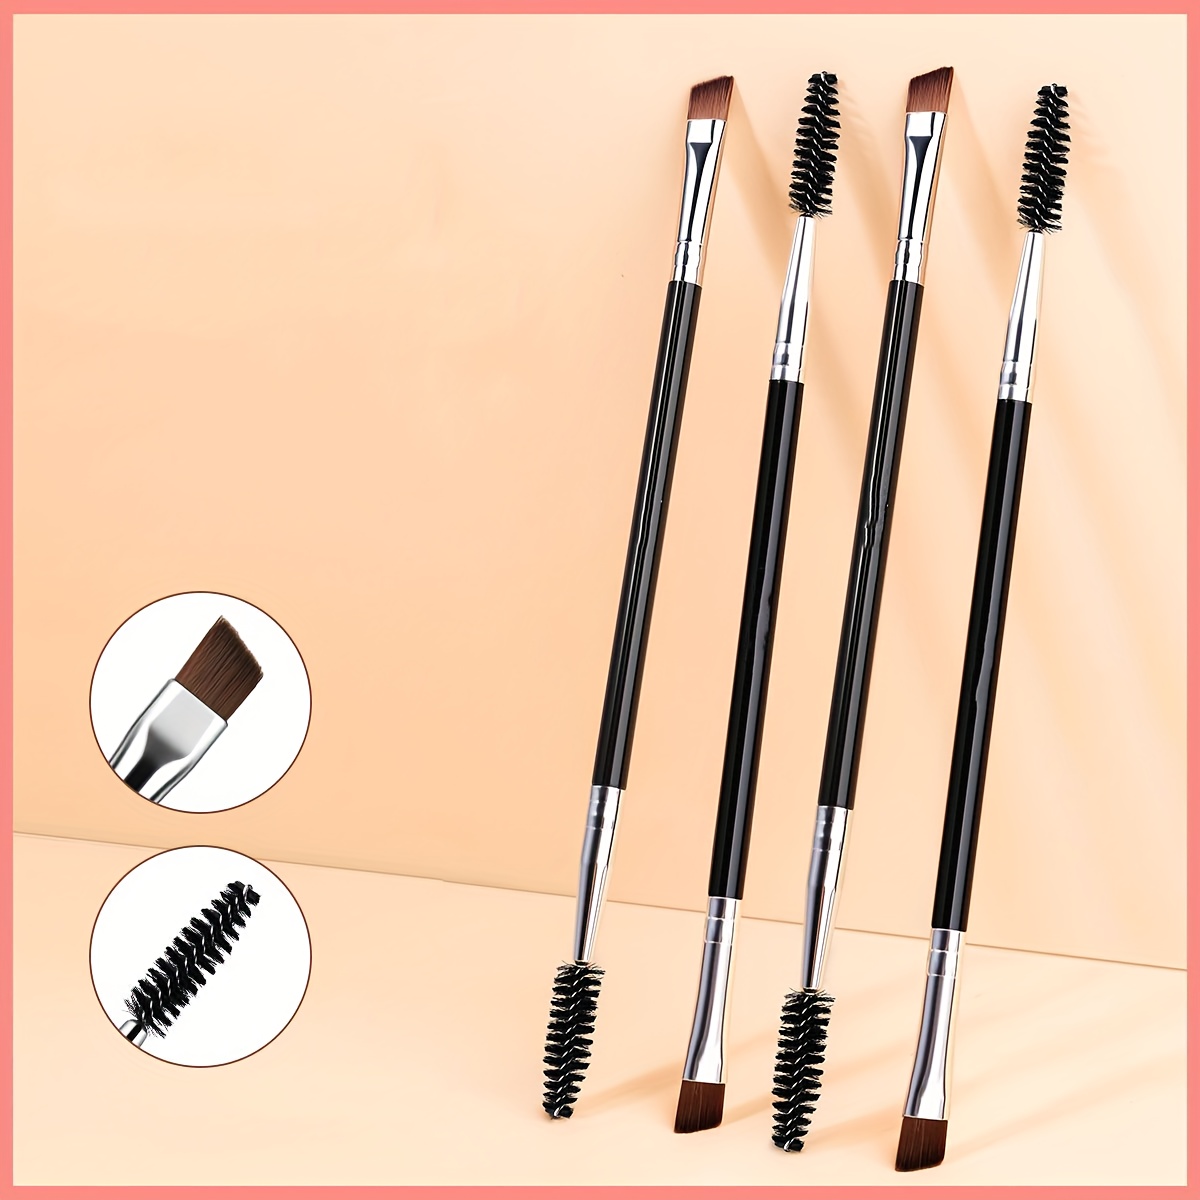 

polyester Bristles" Professional Dual-ended Eyebrow & Lash Brush - Angled Brow Comb, Oil-free Polyester Bristles For All Skin Types